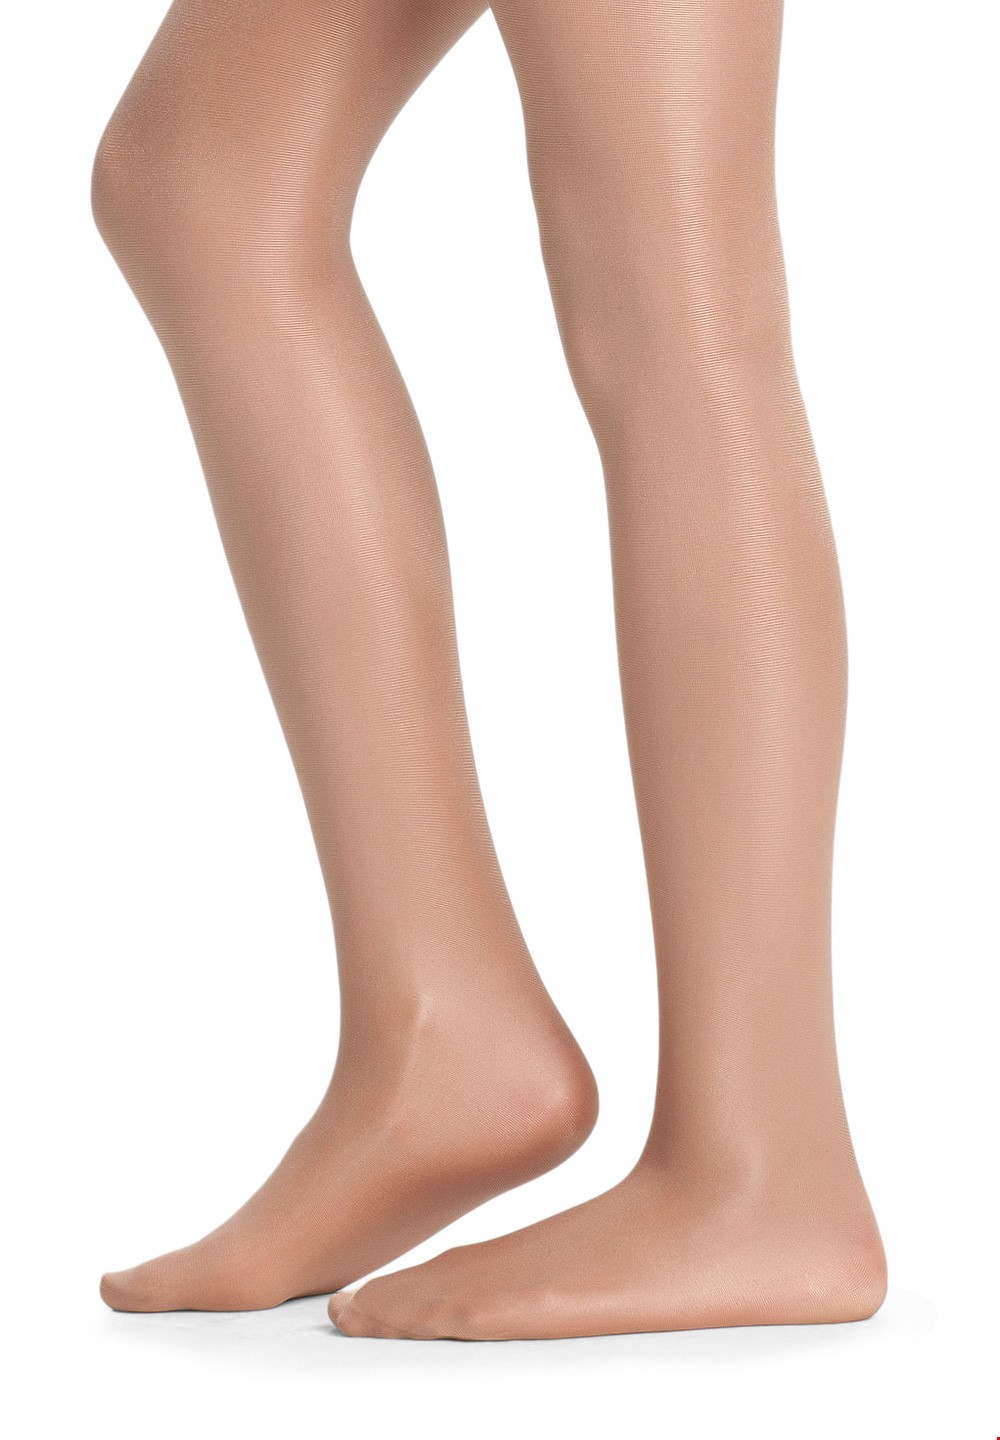 Danskin 331 Girl's Theatrical Pink Ultra Shimmery Footed Tights